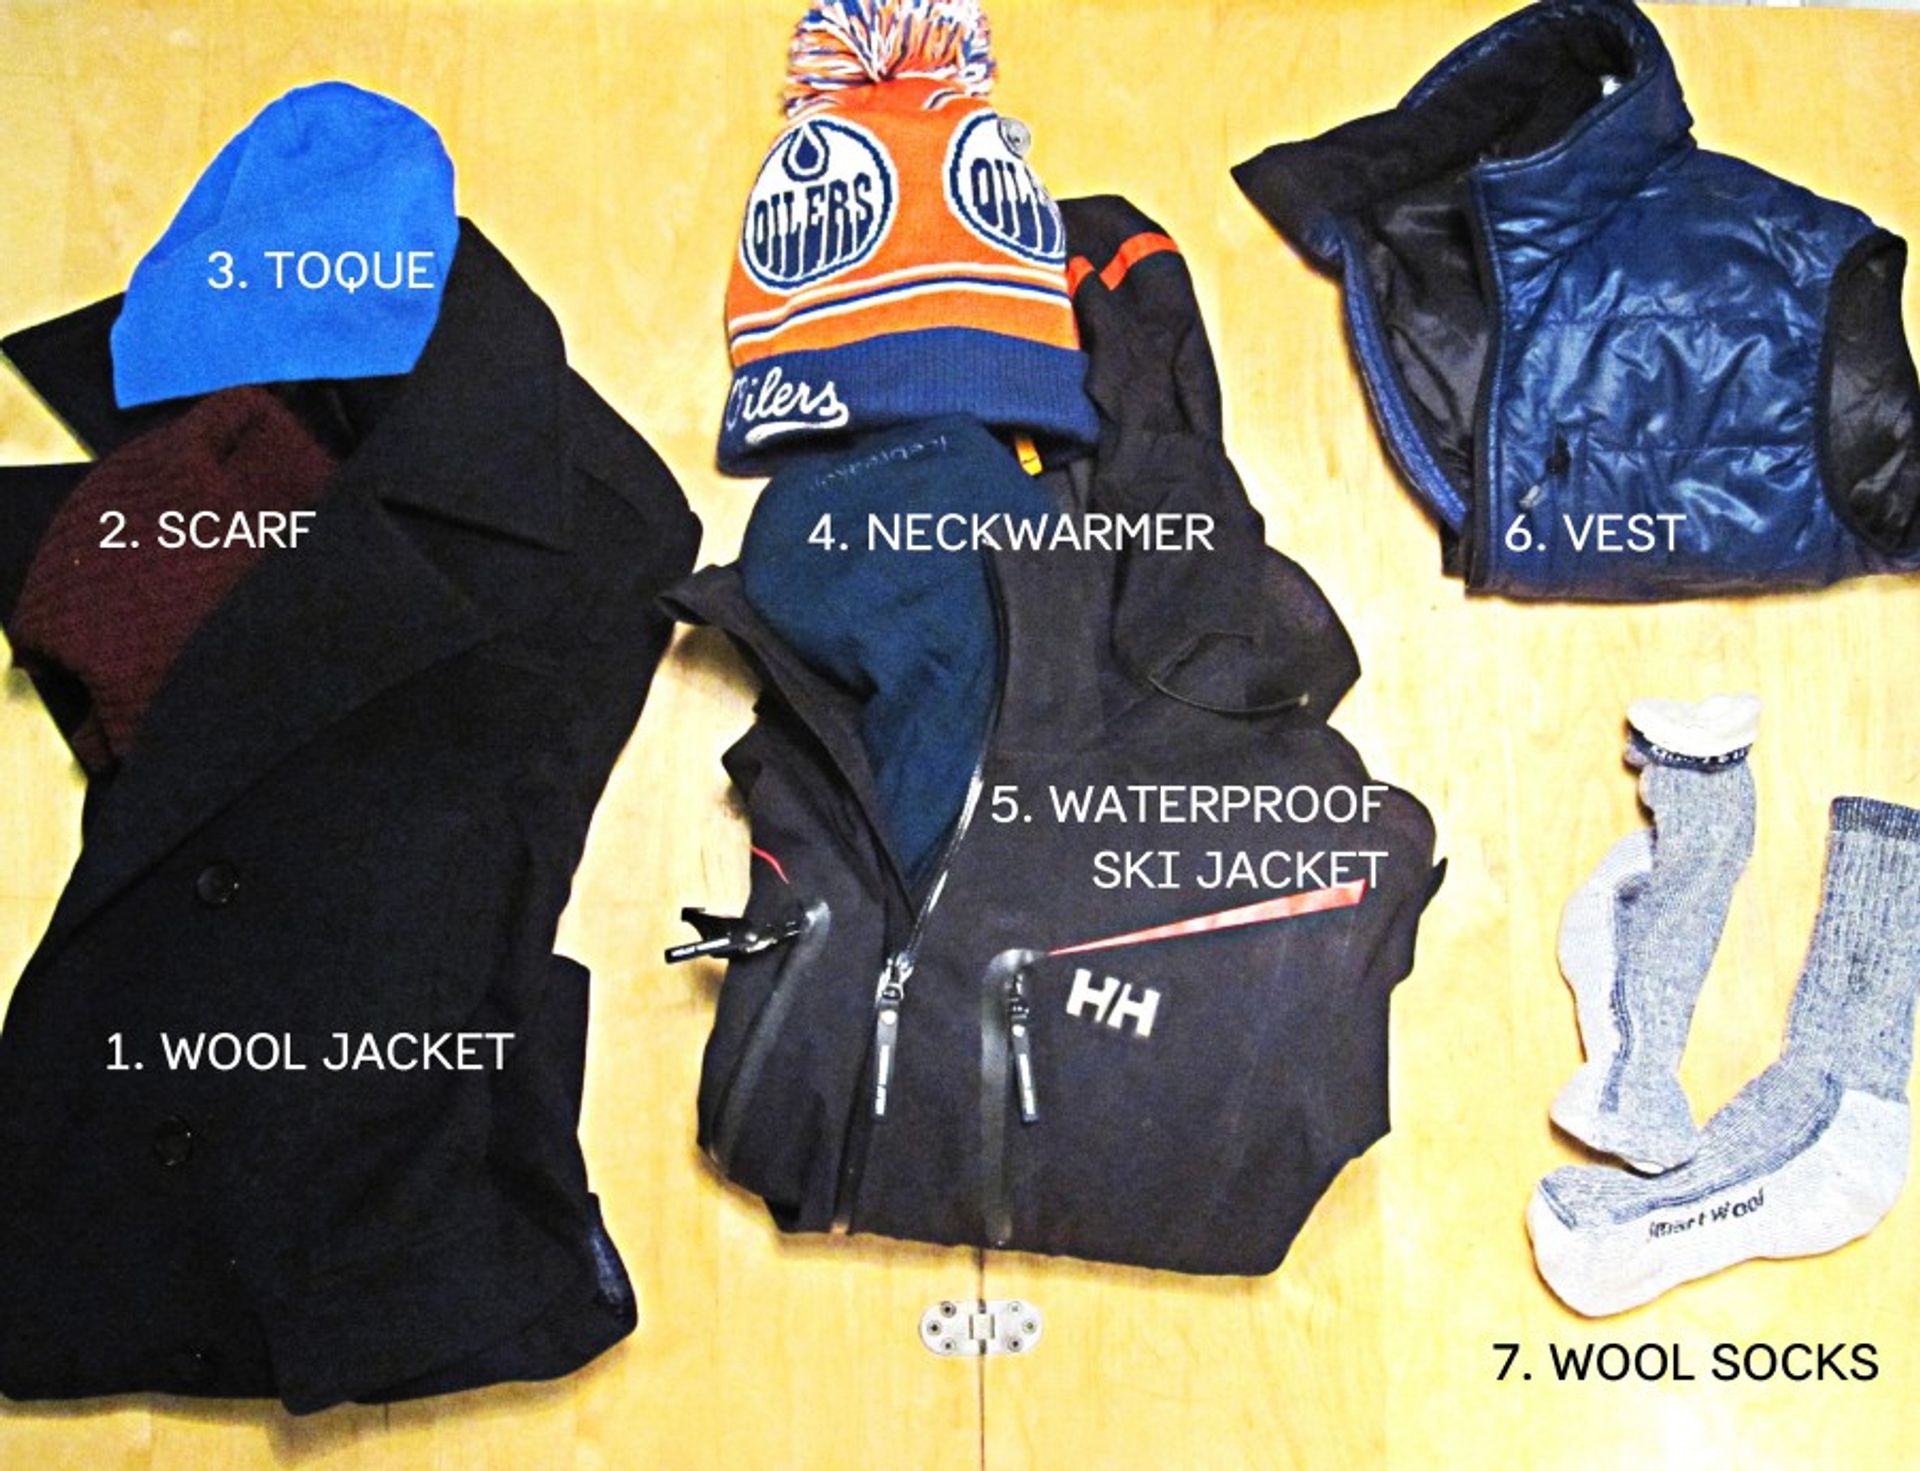 Assortment of clothes including vest, scarf, wool jacket, wool socks and waterproof ski jacket.